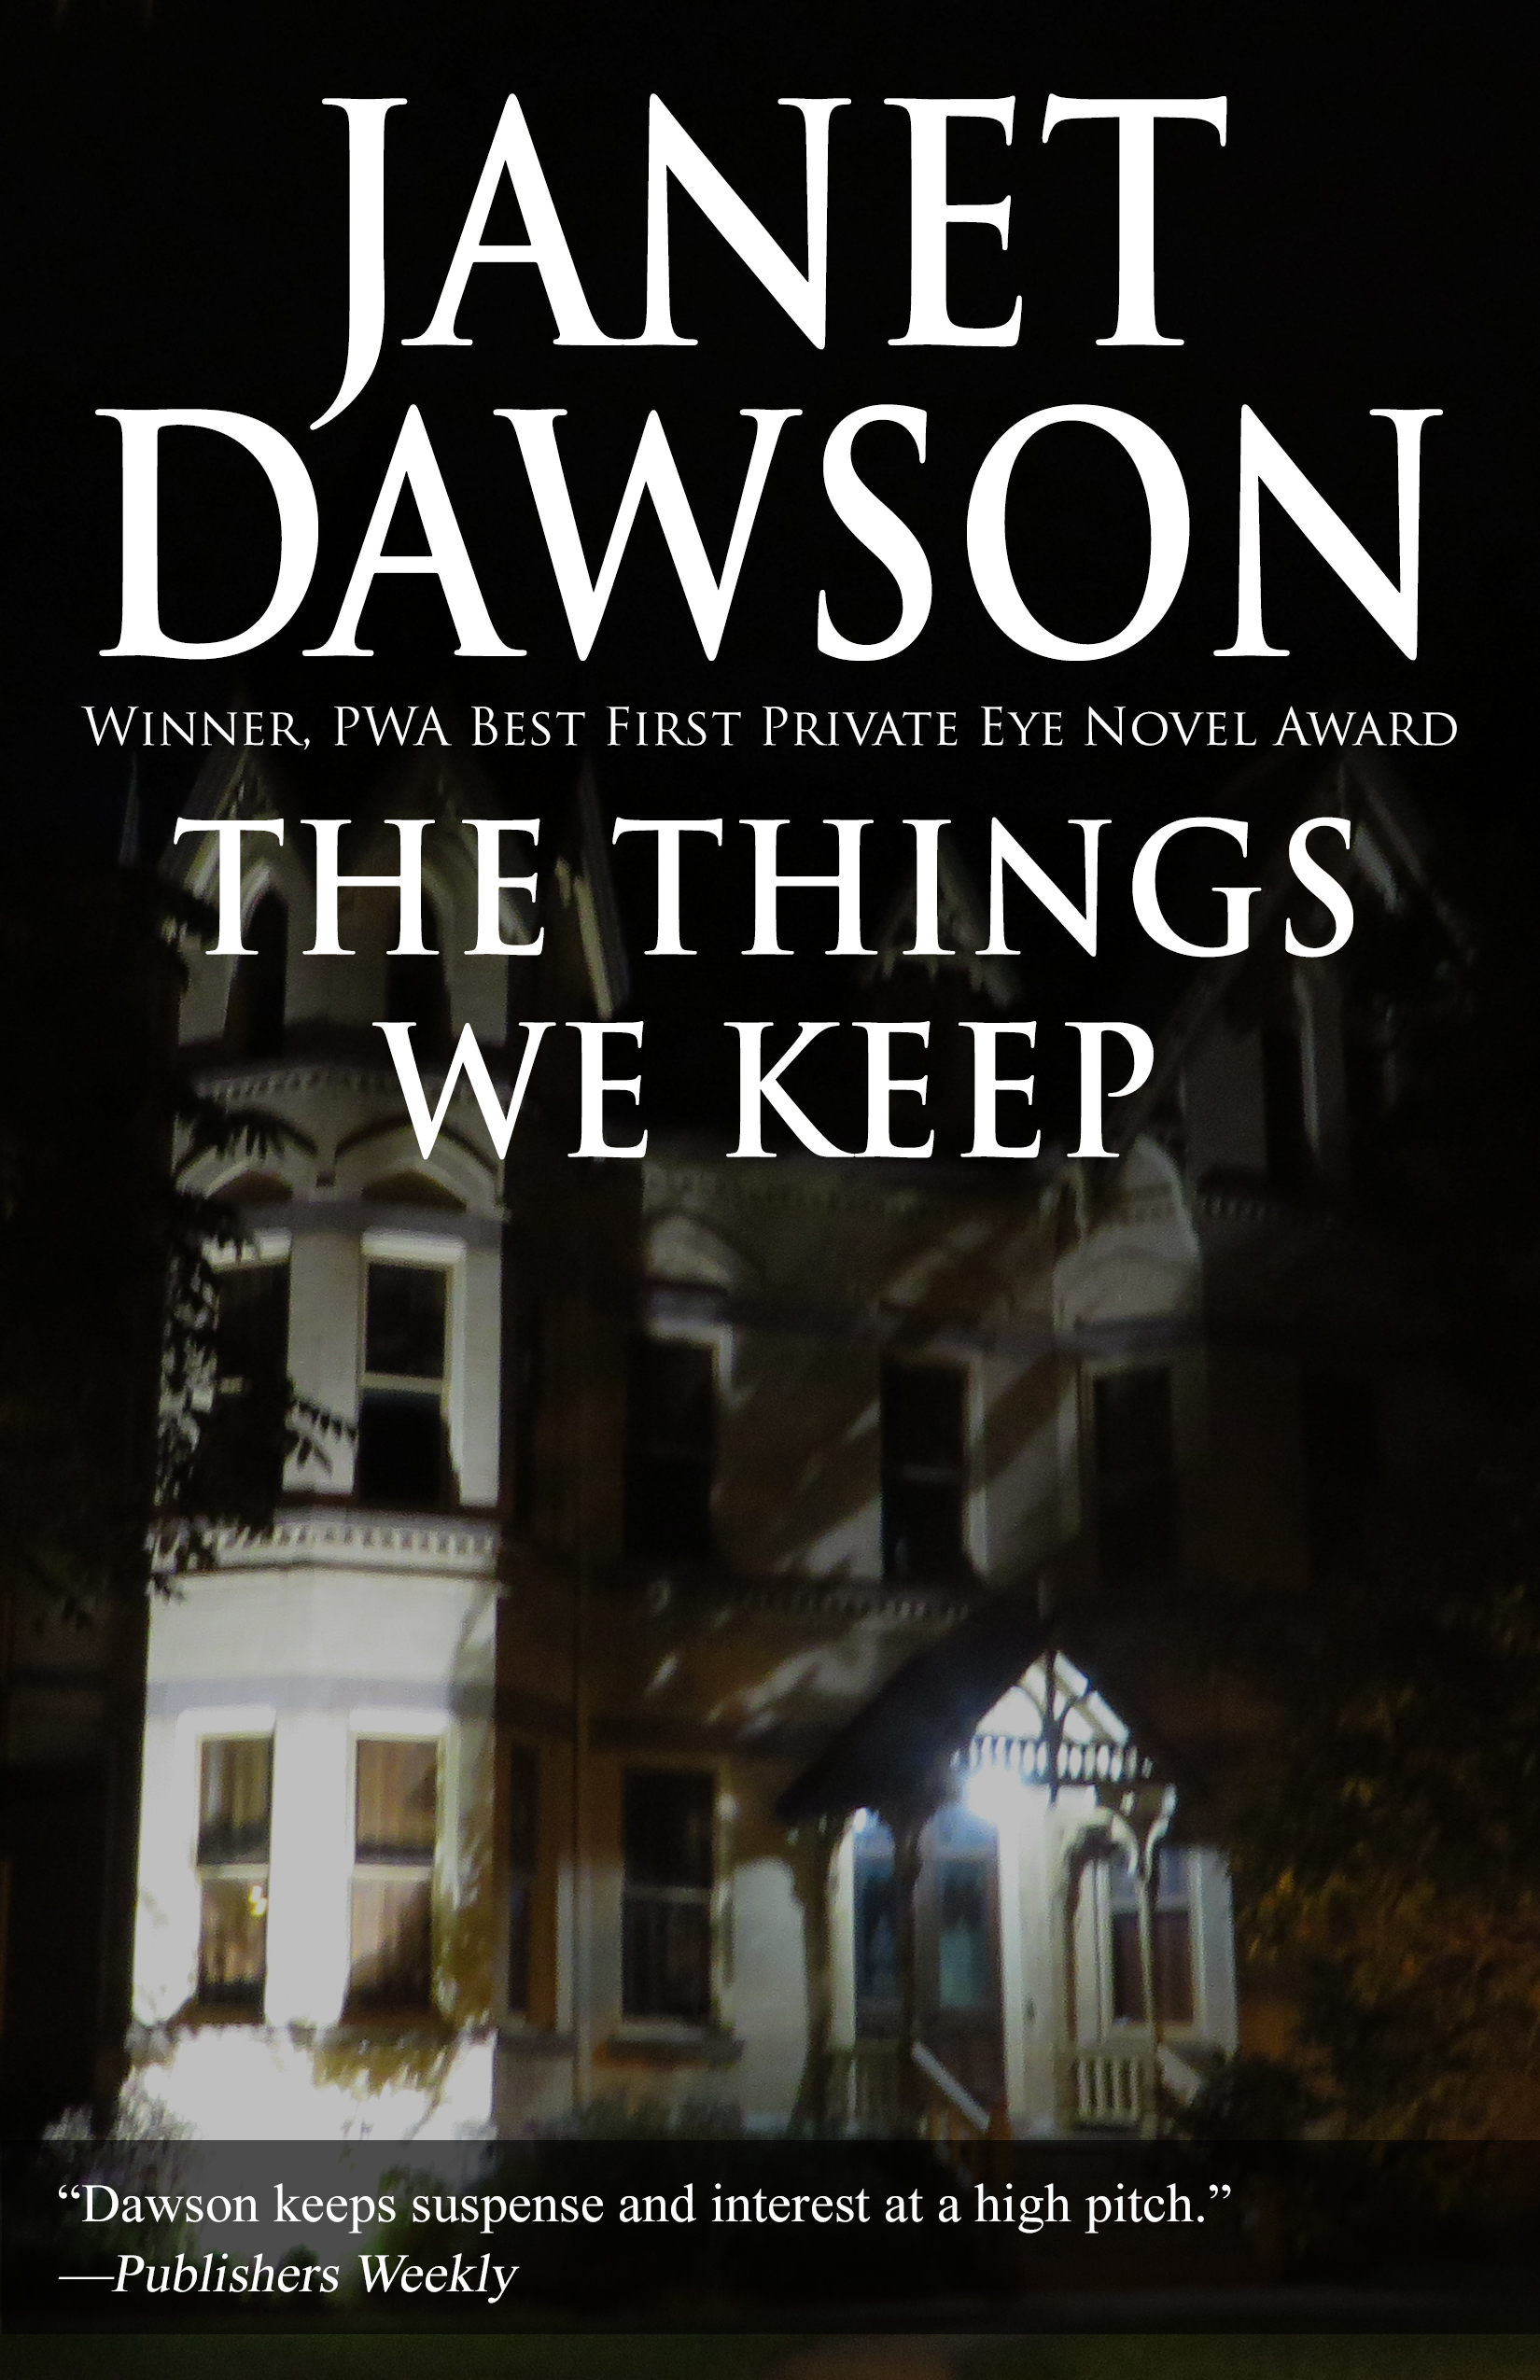 The Things We Keep by Janet Dawson